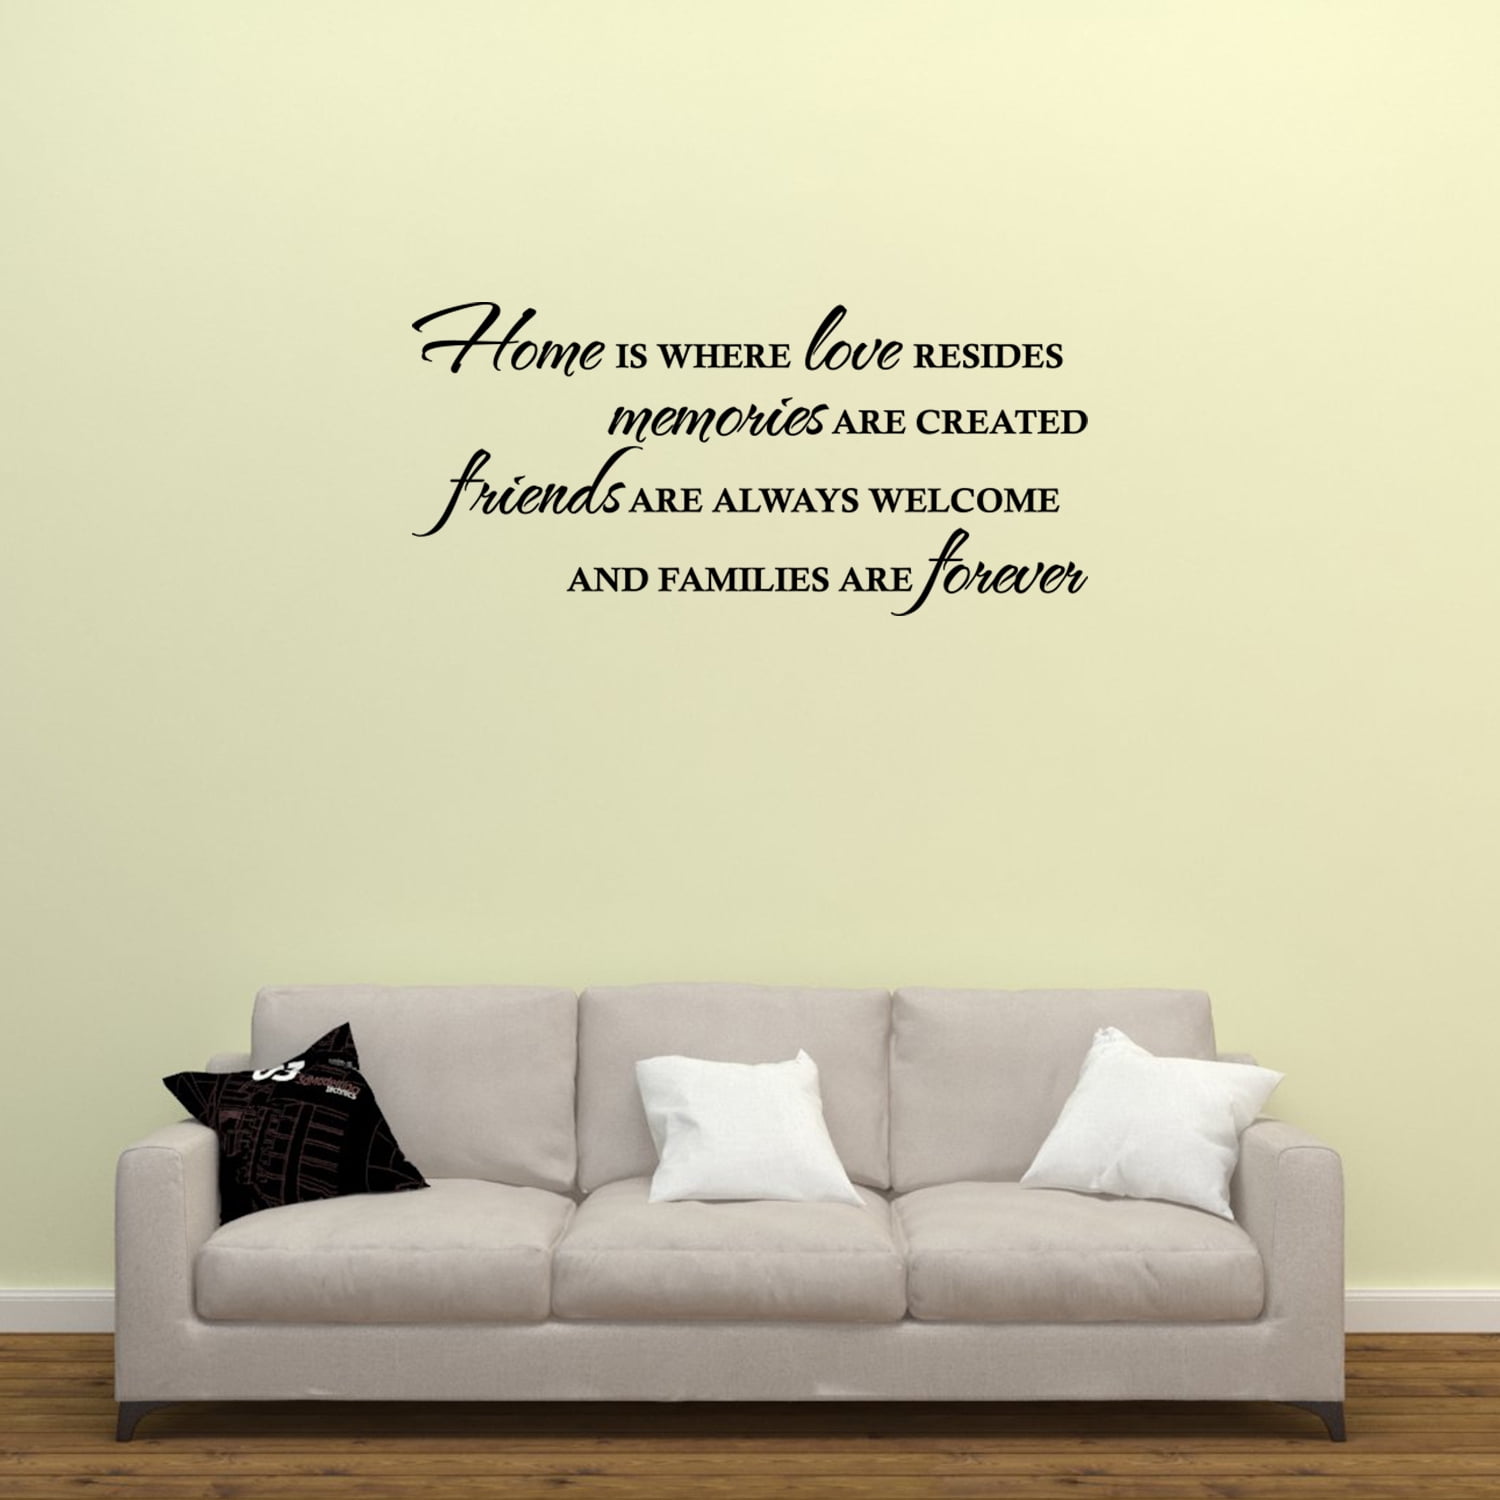 Forever a Family Wall Decal Vinyl Decor Saying Art Sticker Quote Lettering F54 